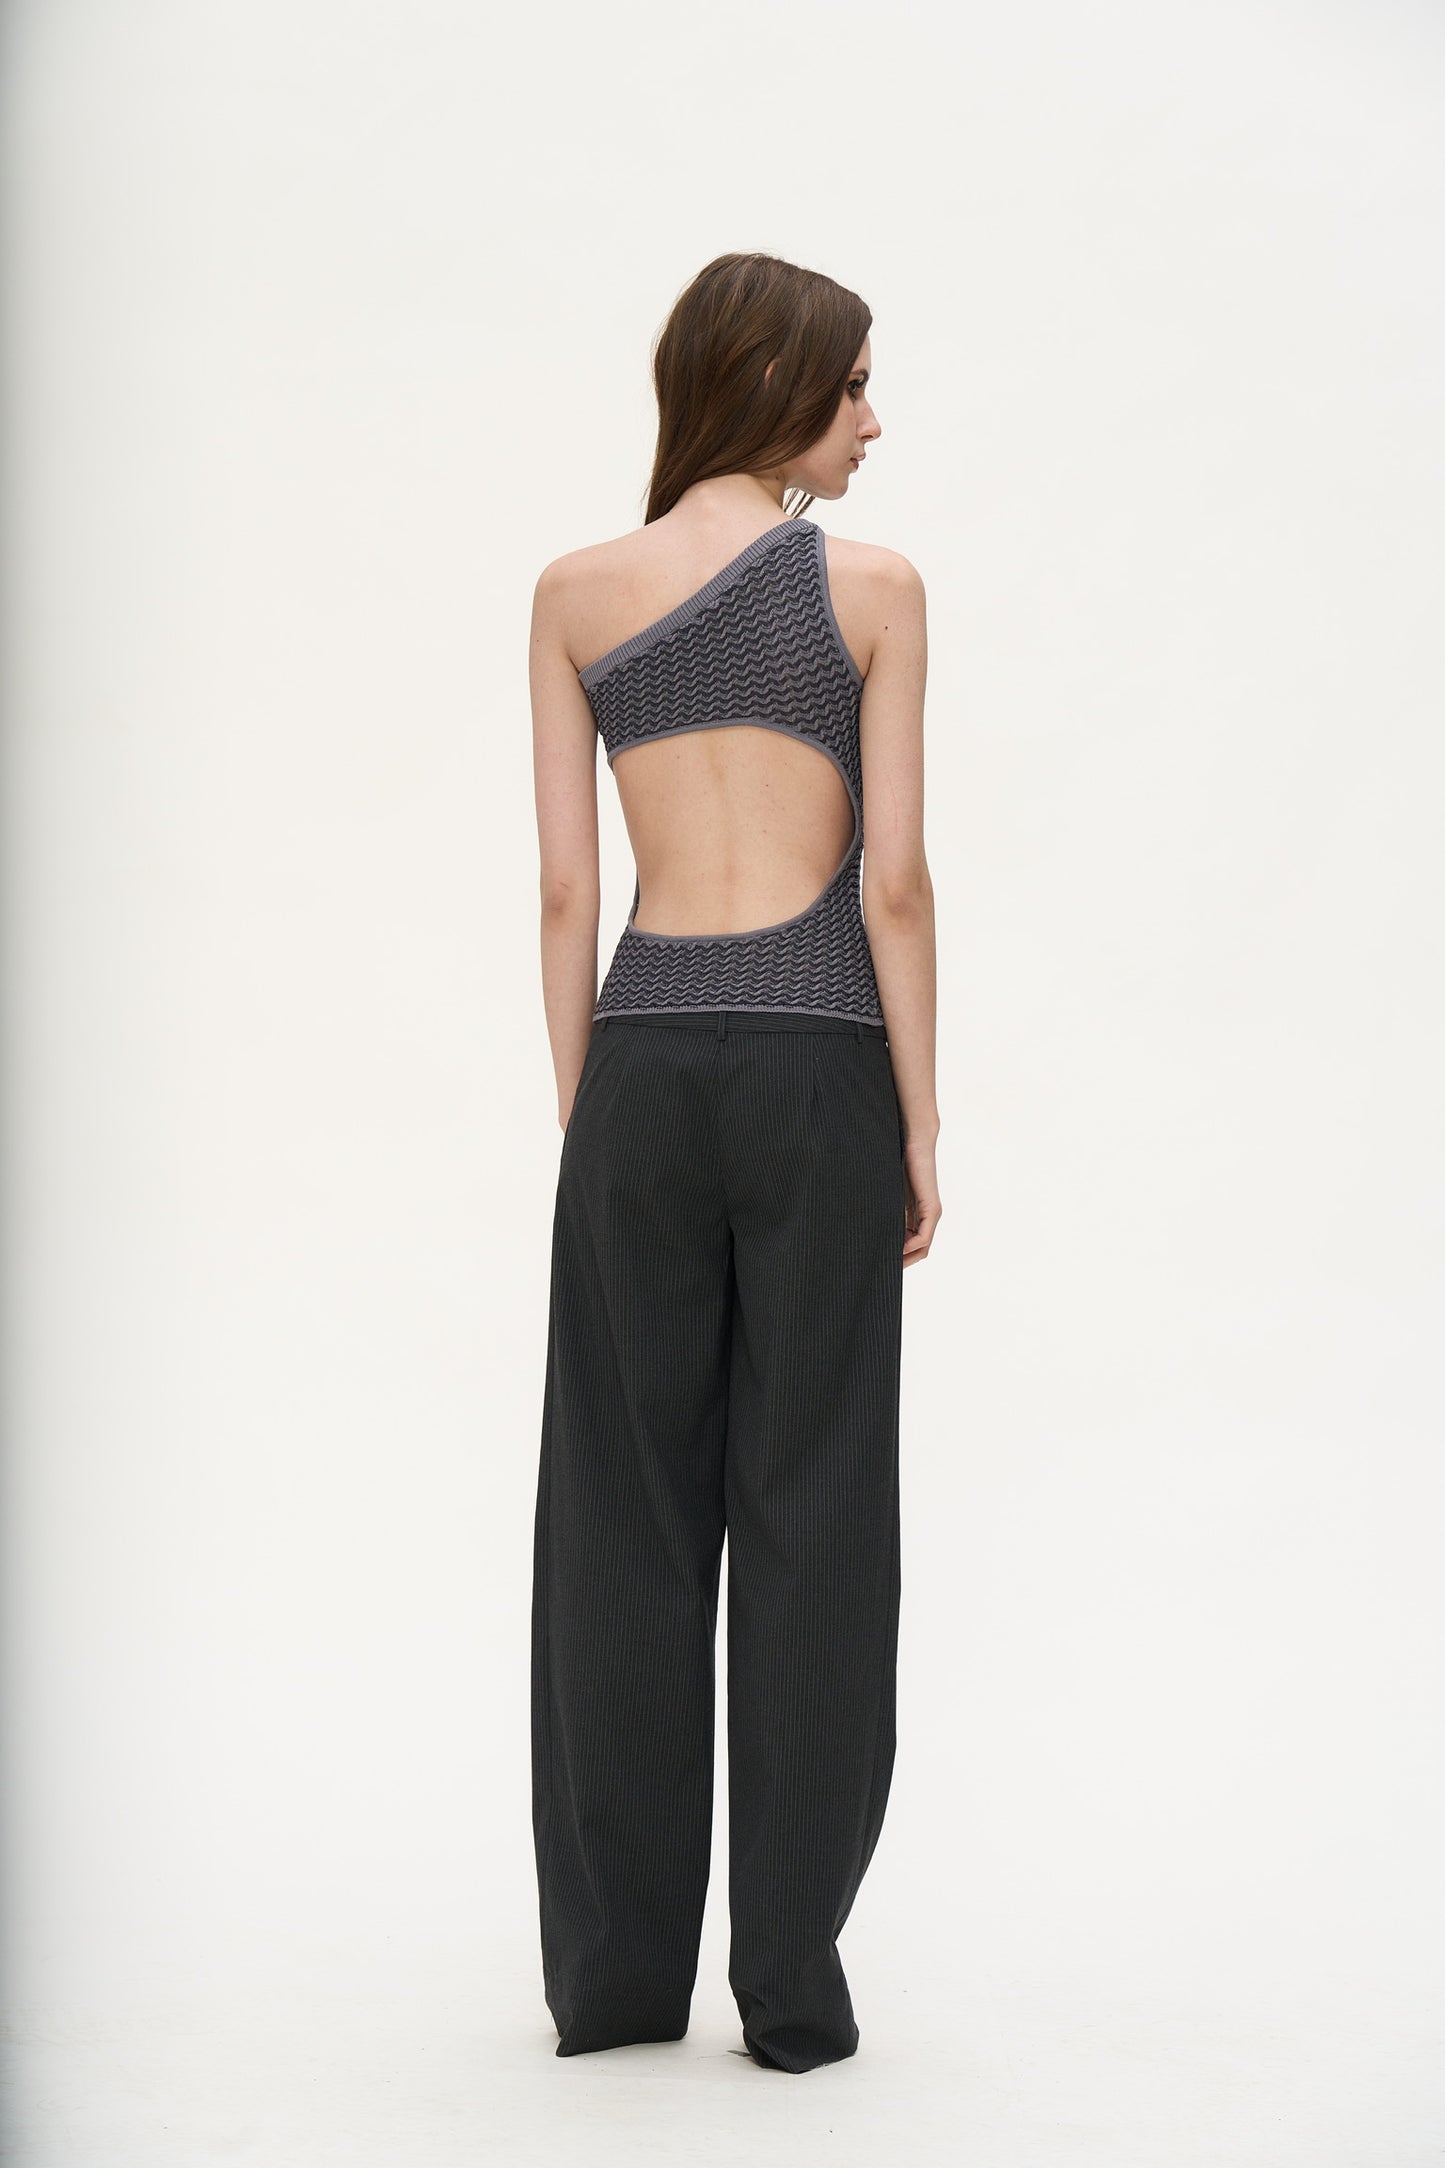 Junie Backless Knit Top in Gray